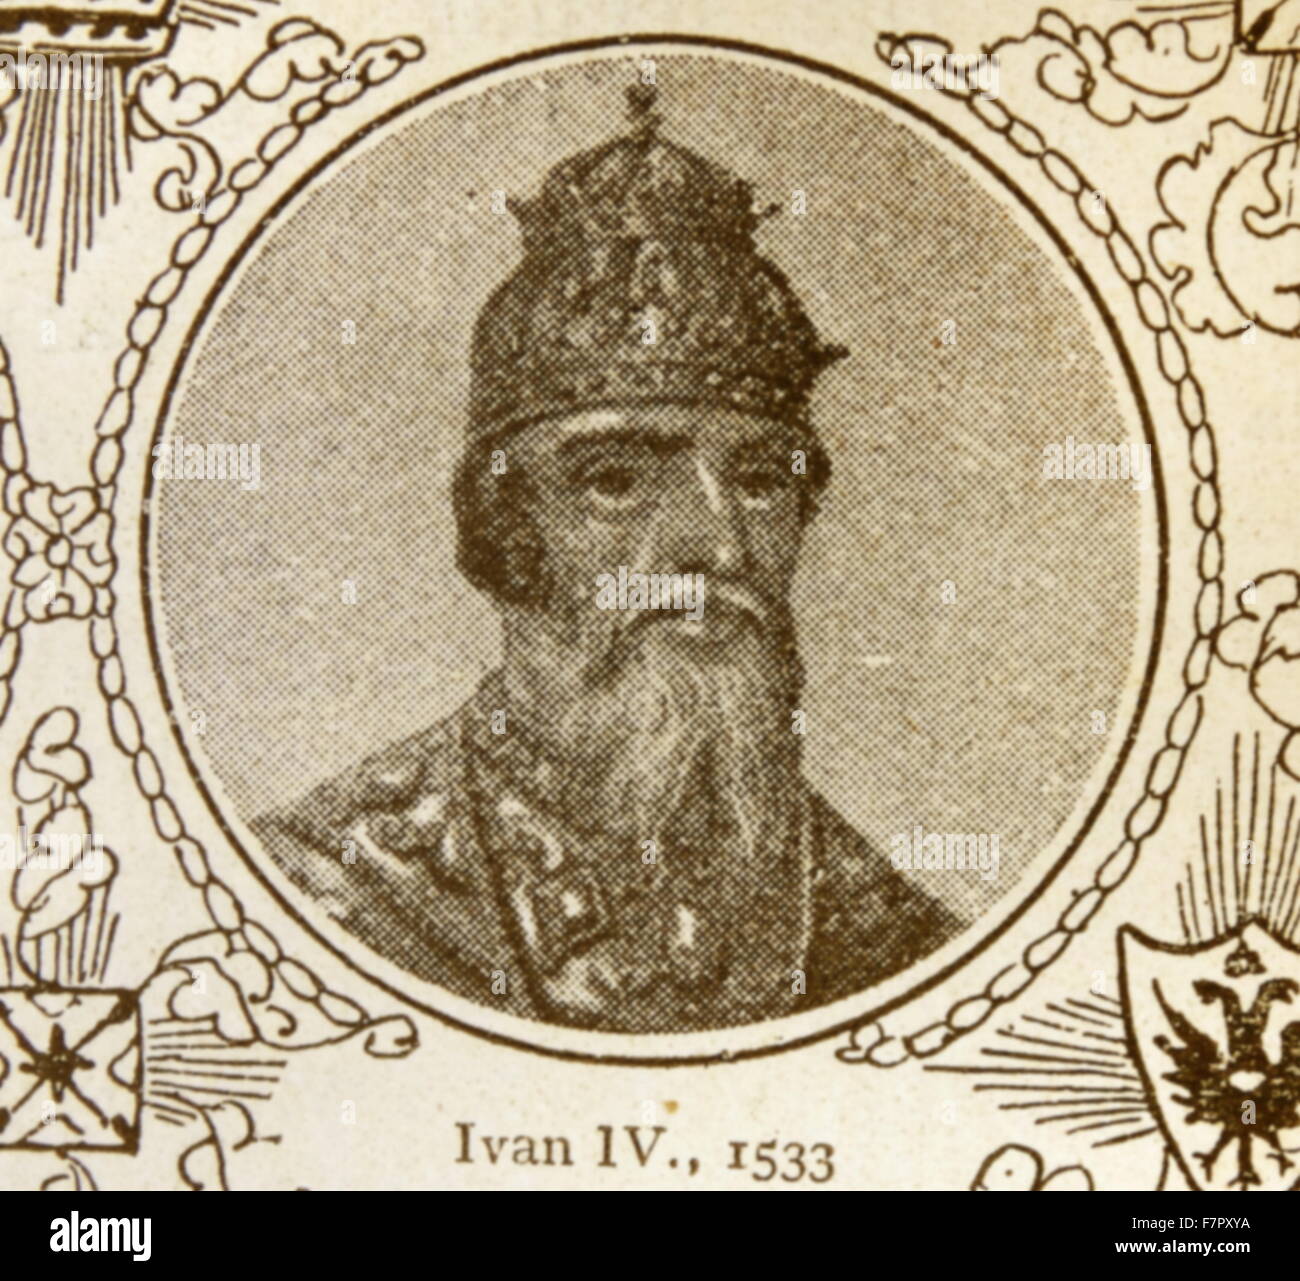 Ivan IV Vasilyevich (1530 – 1584), Ivan the Terrible. Grand Prince of Moscow from 1533 to 1547 and Tsar of All the Russia's from 1547 until his death Stock Photo